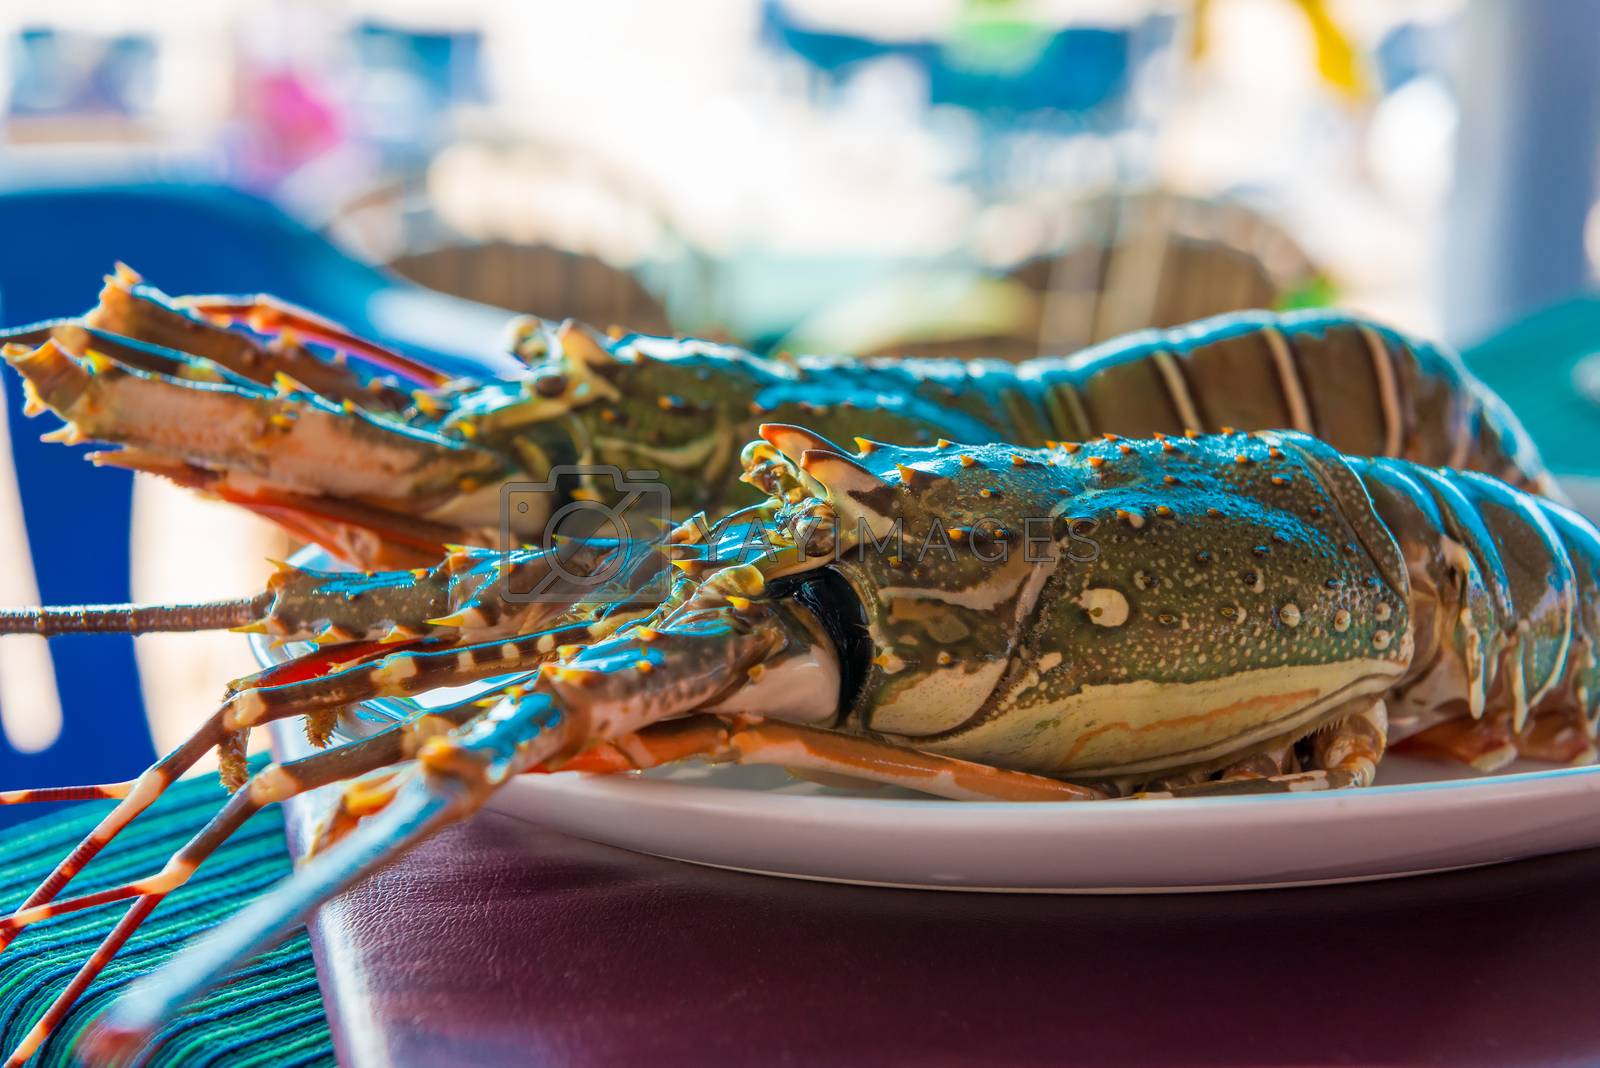 Royalty free image of two raw sea lobster on a plate by kosmsos111